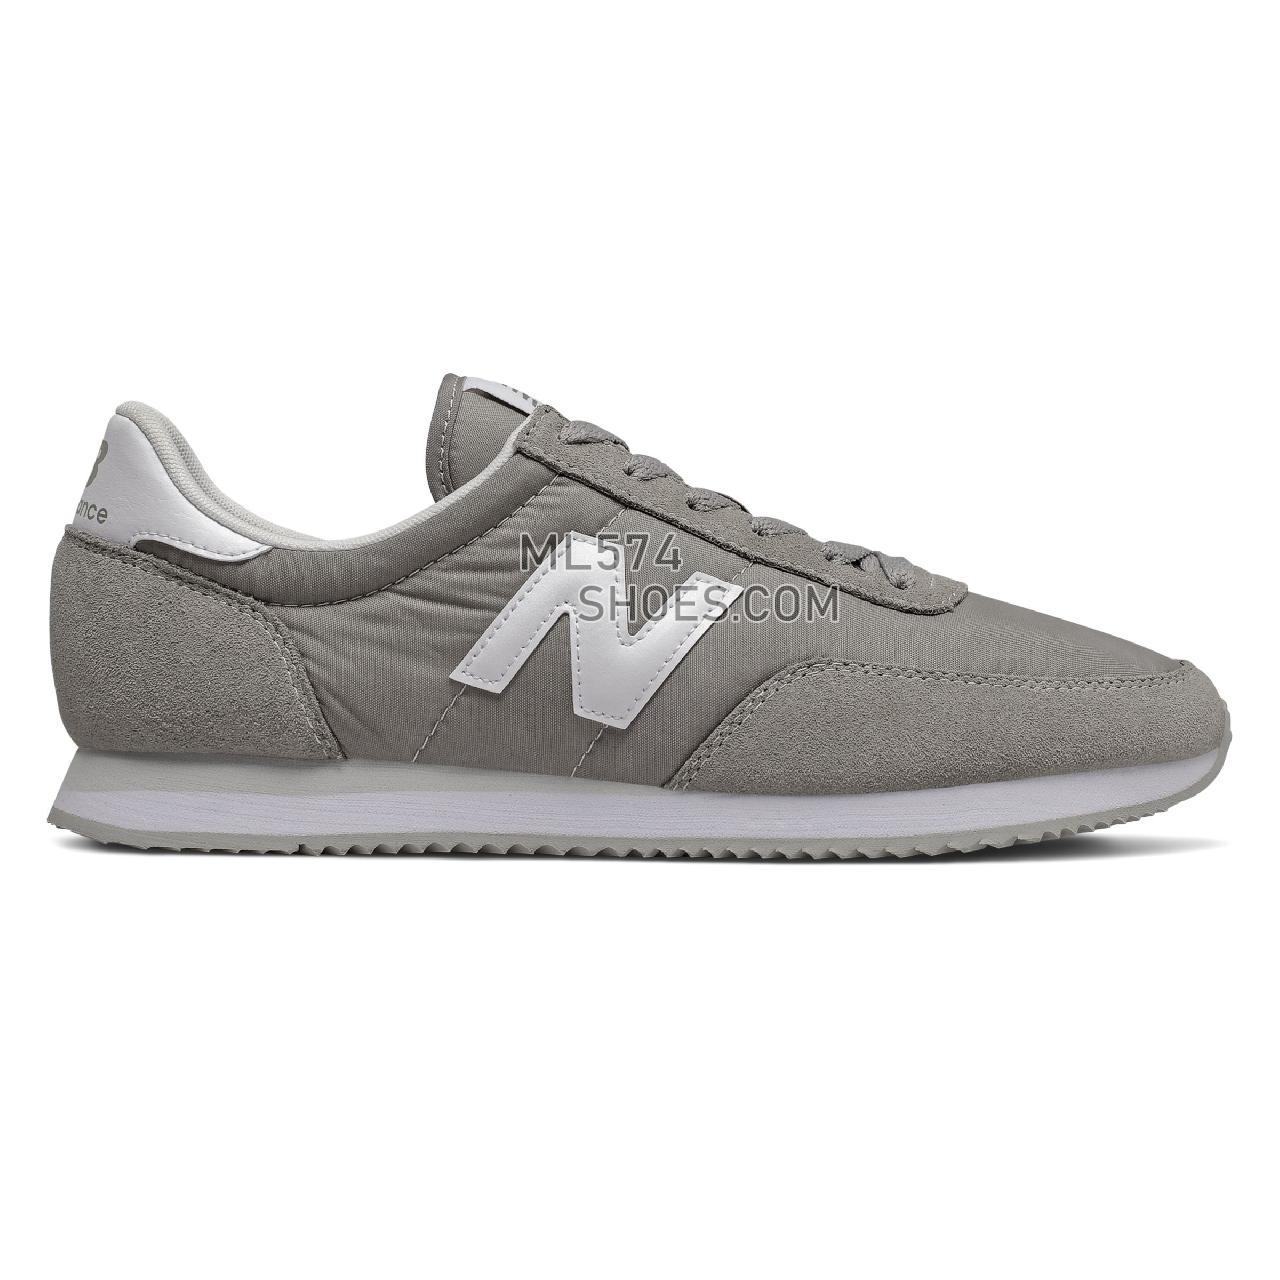 New Balance 720 - Men's 720 Classic - Team Away Grey with White - UL720AD